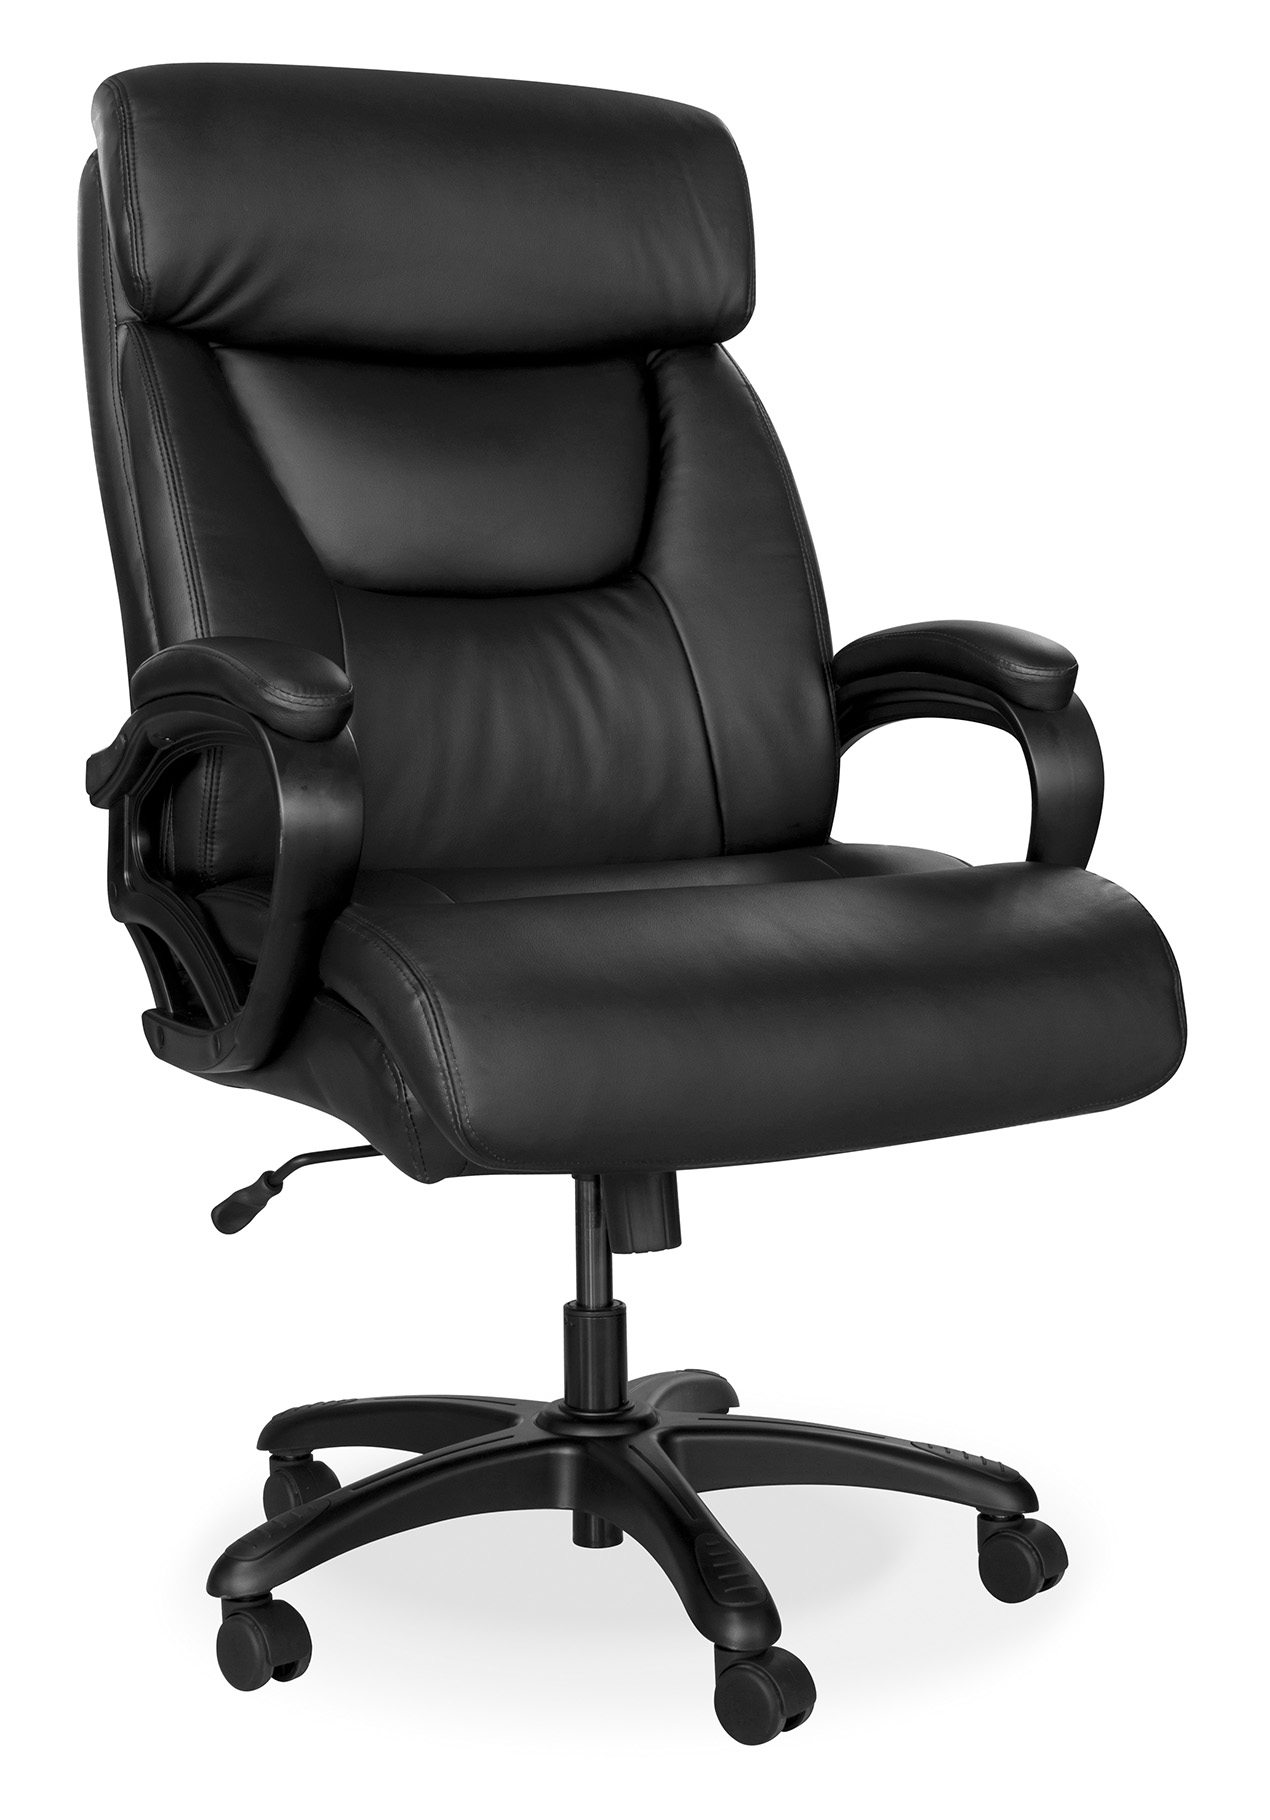 heavy duty king cobra leather office chair sold out